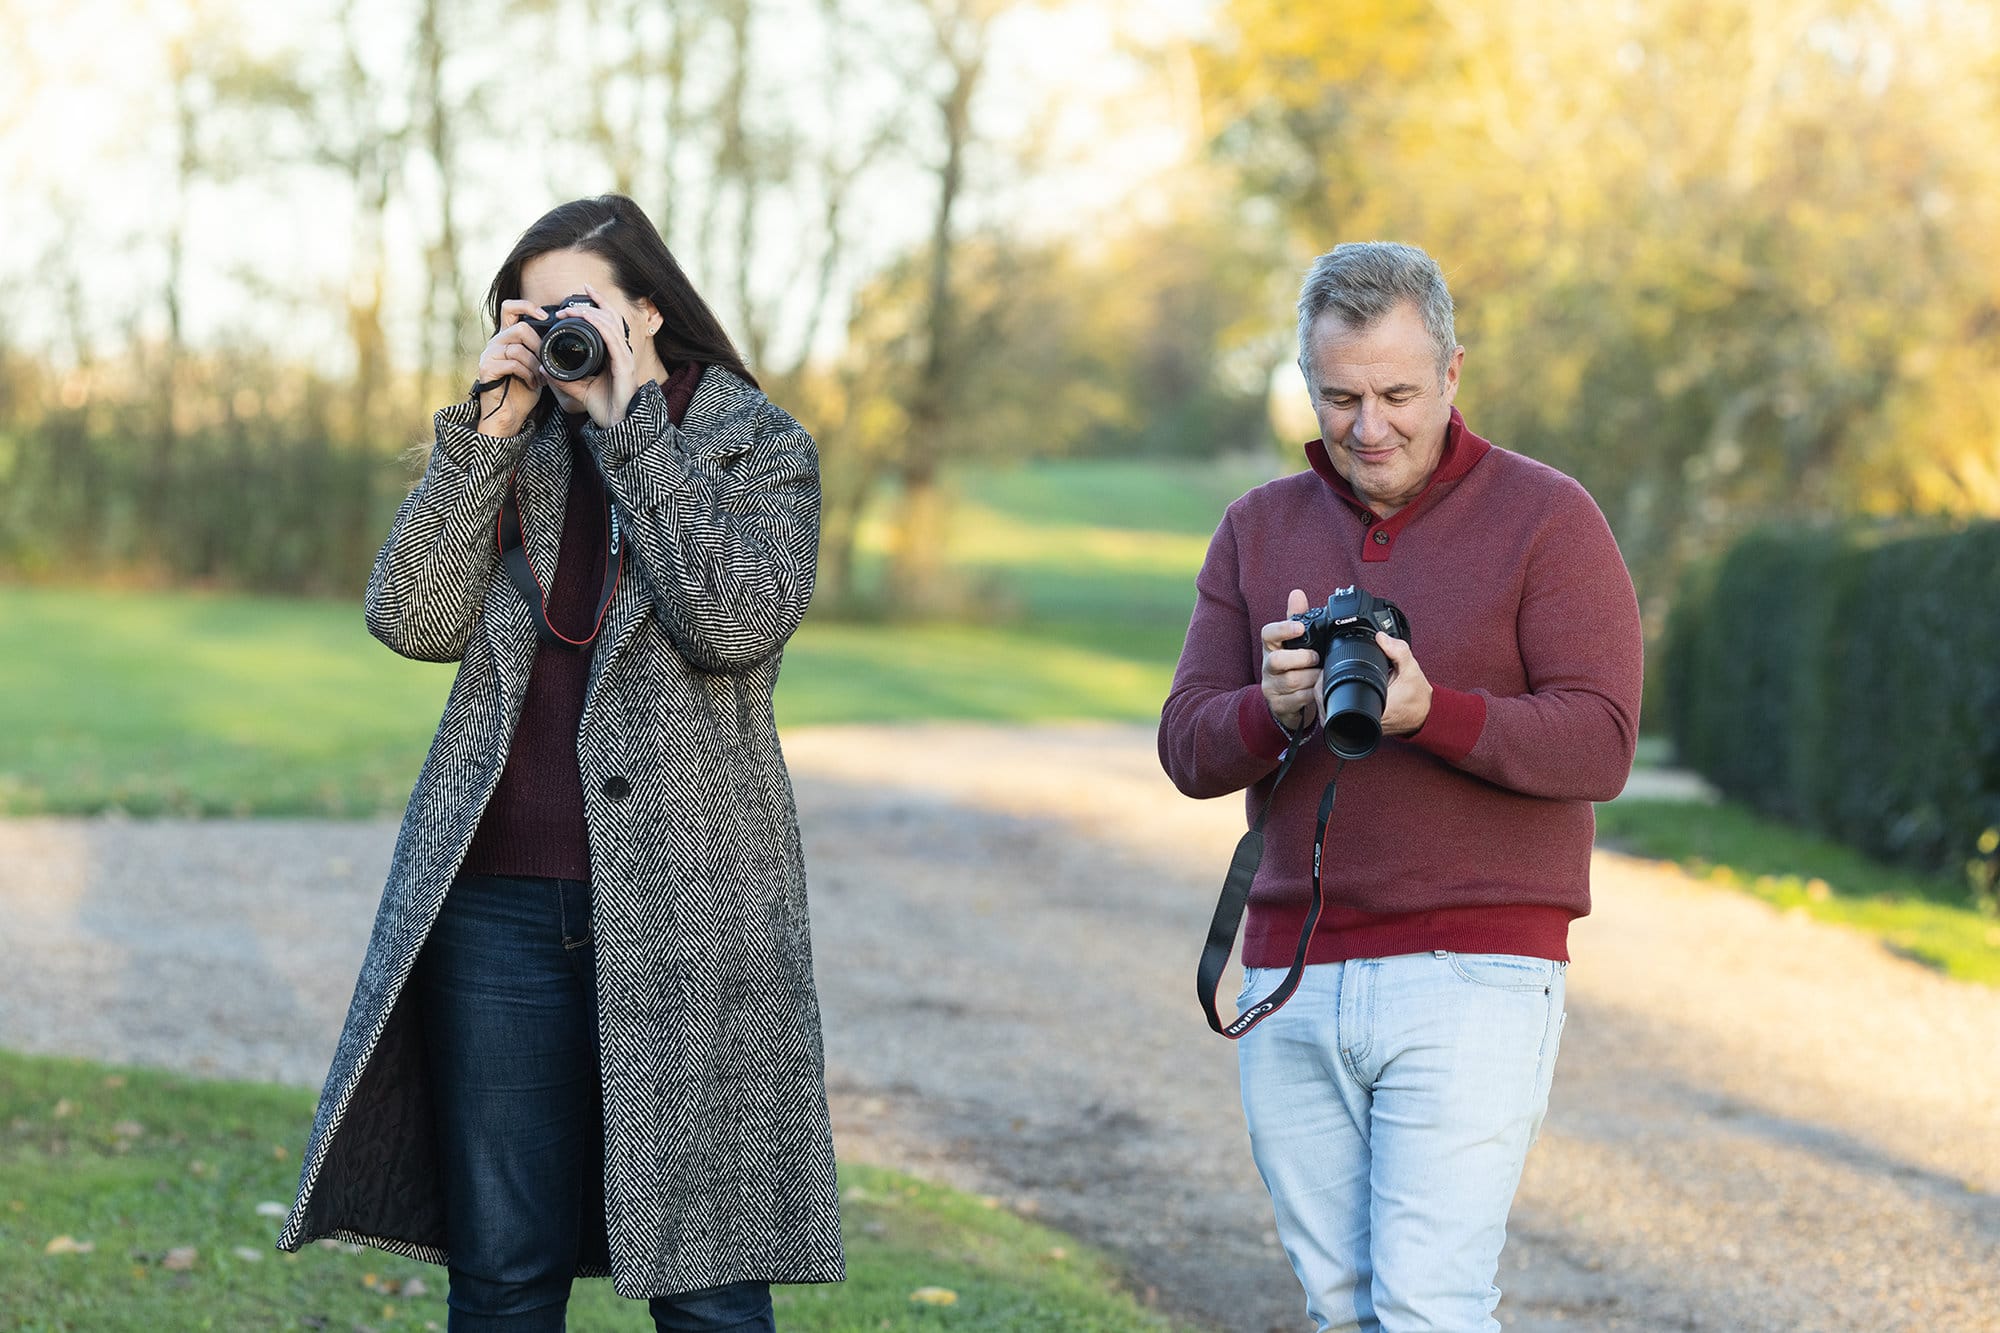 Two ameteur photographers practice what they have learnt at Alison McKenny Photography's Beginner Workshop in Suffolk